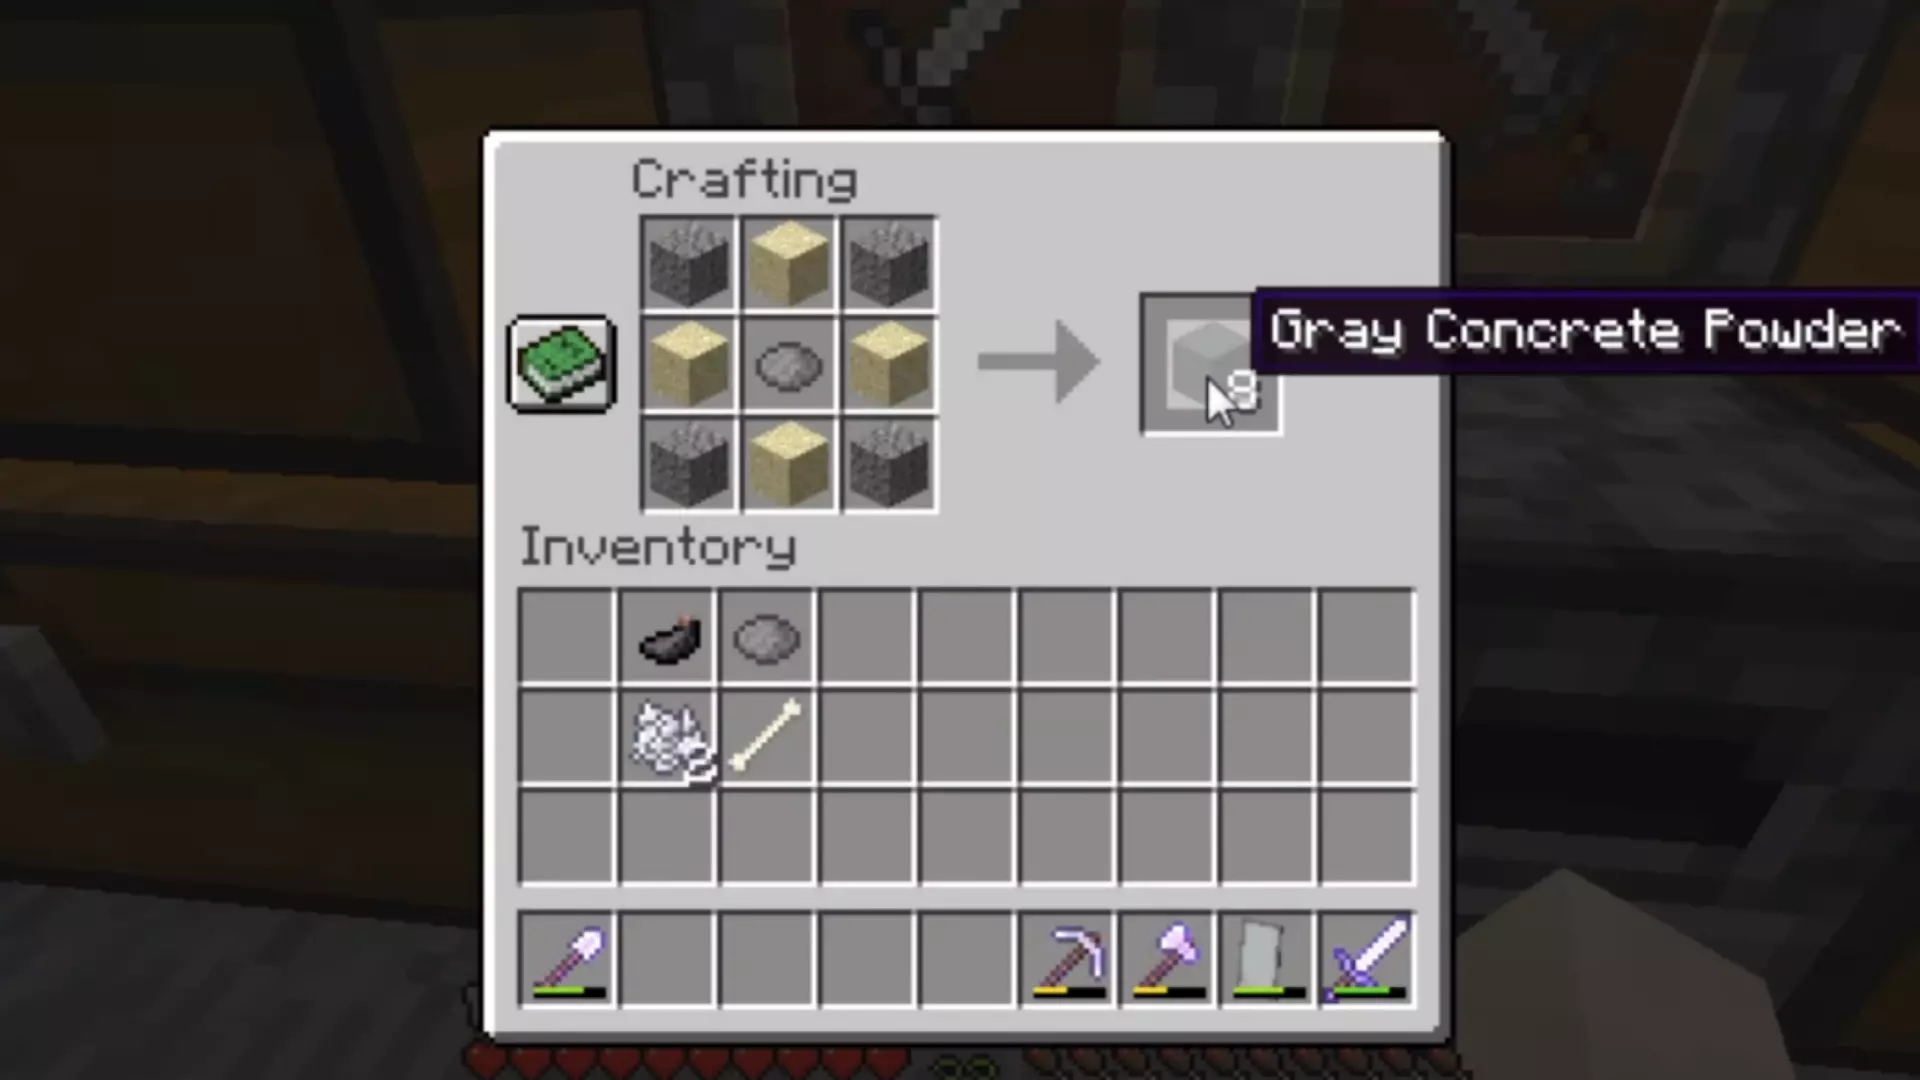 How to get grey color concrete in Minecraft